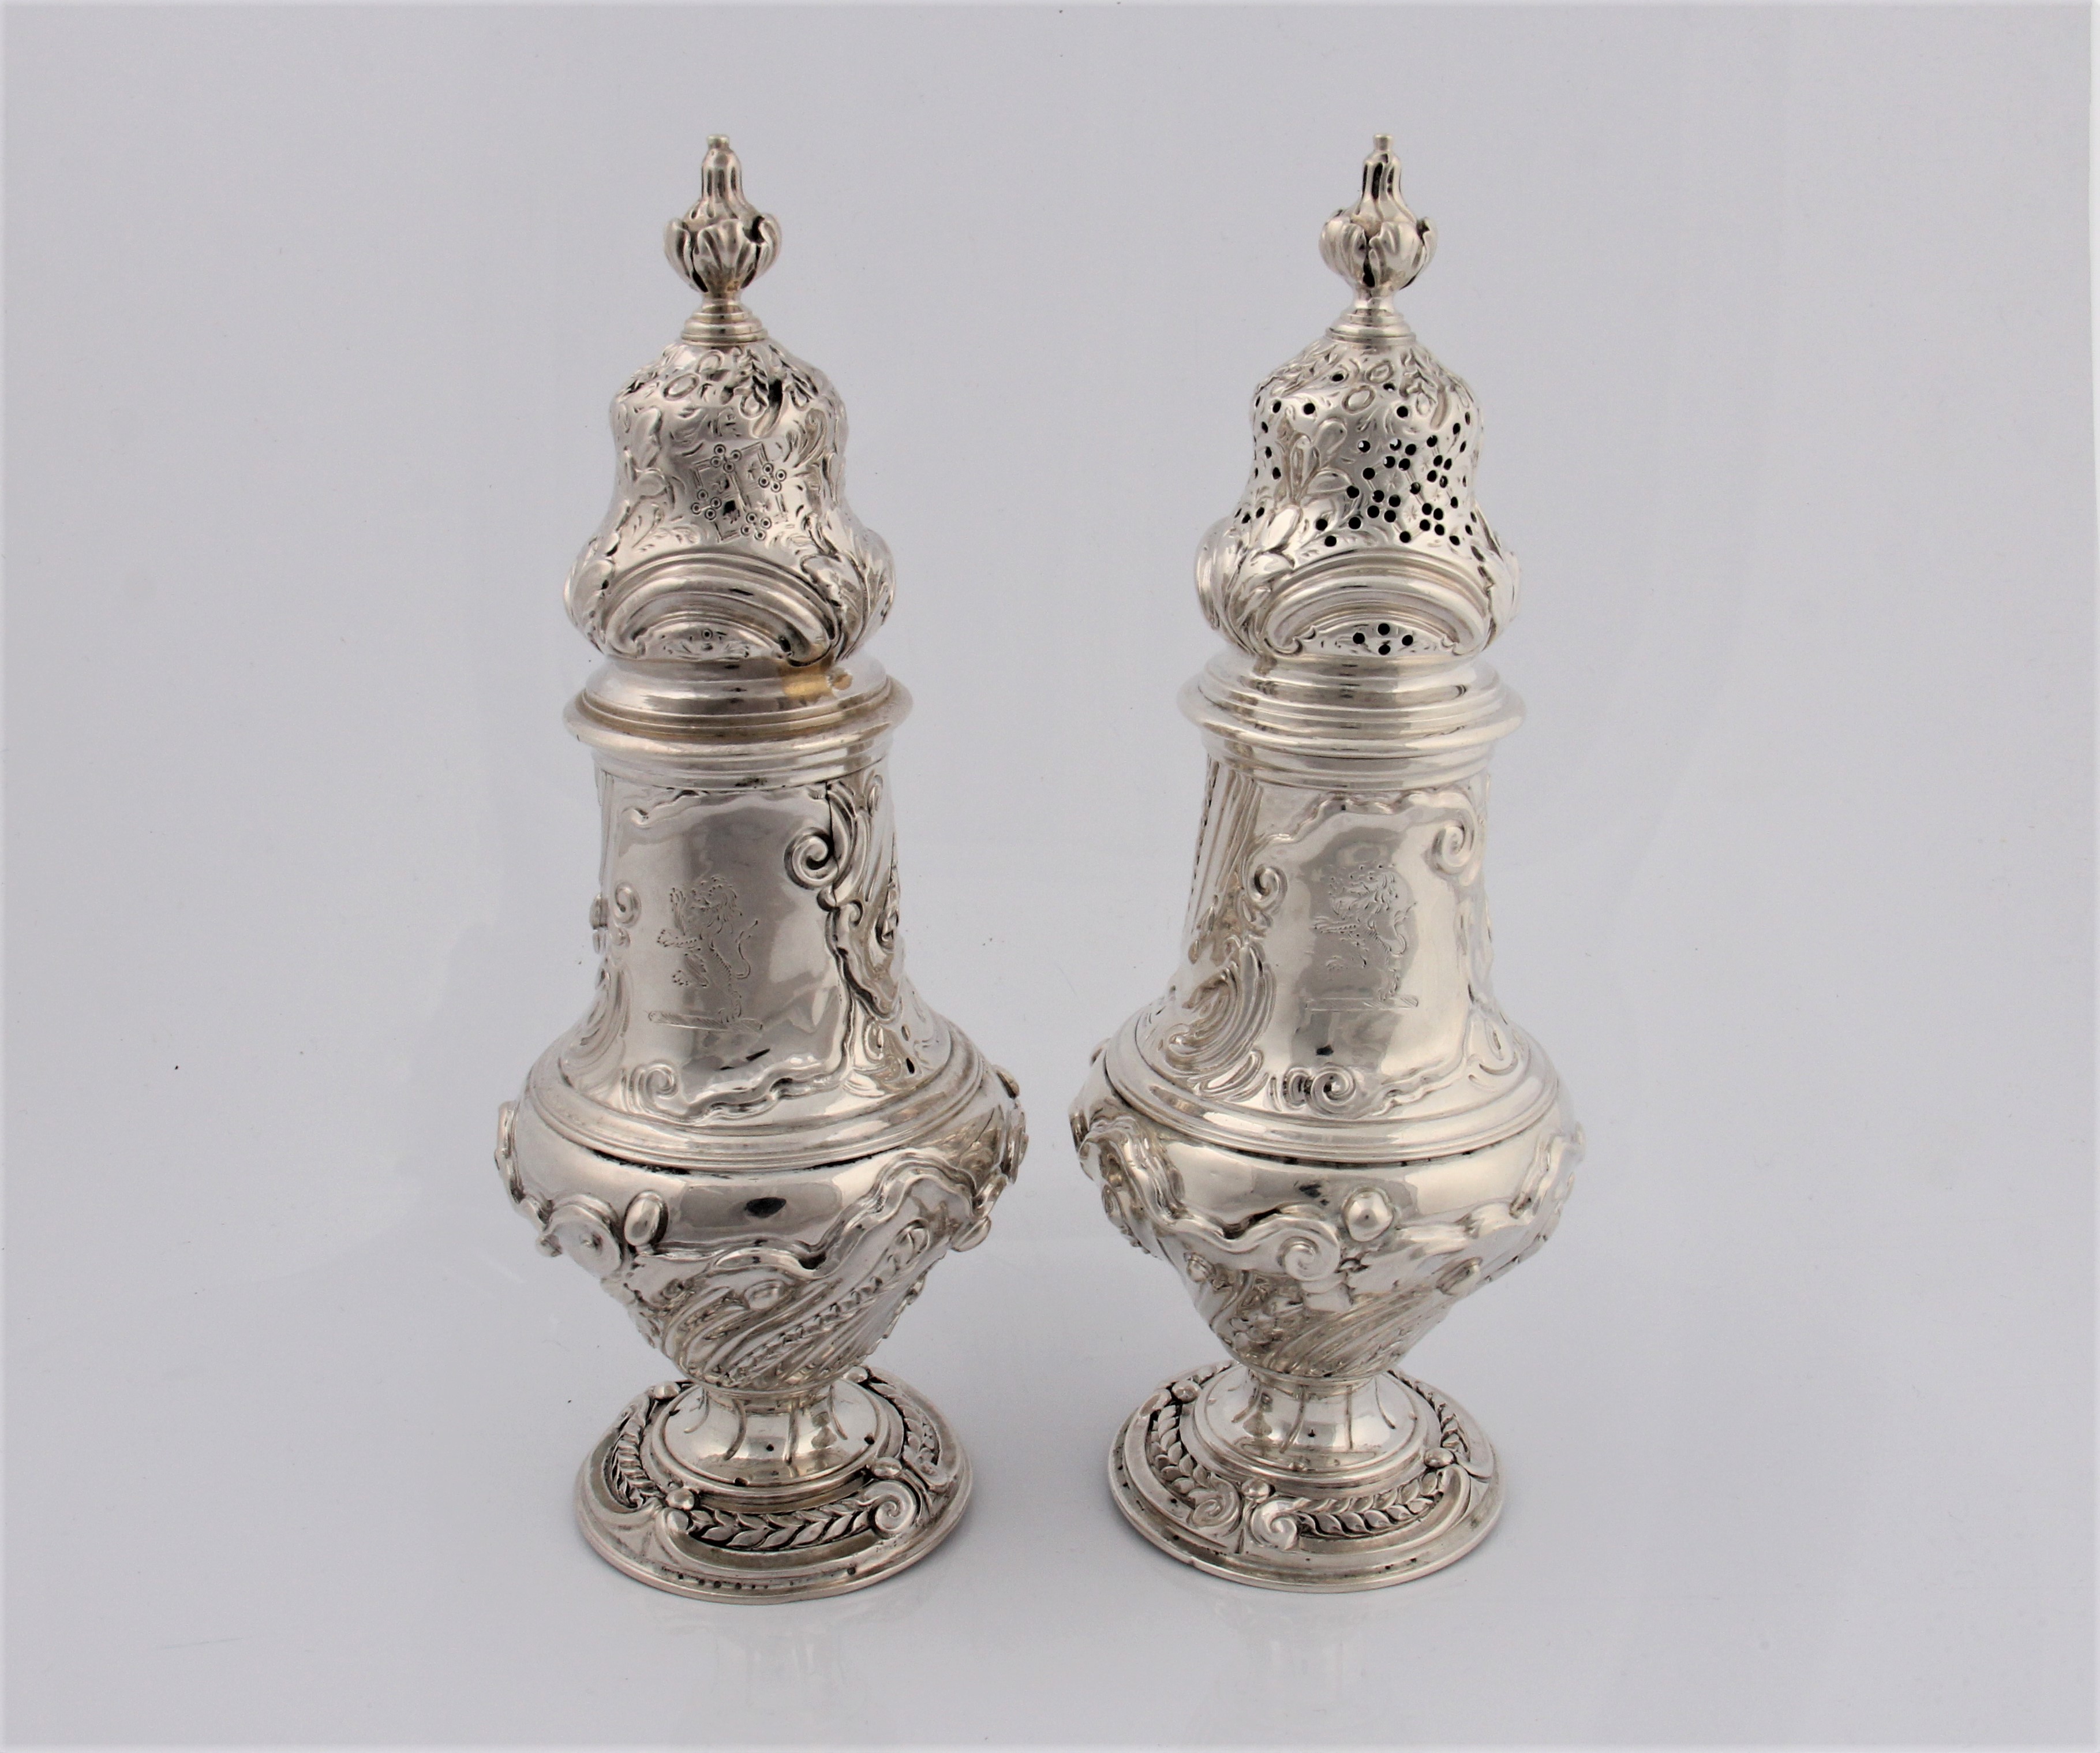 A George III silver sugar caster with a matching spice pot marks for London 1761